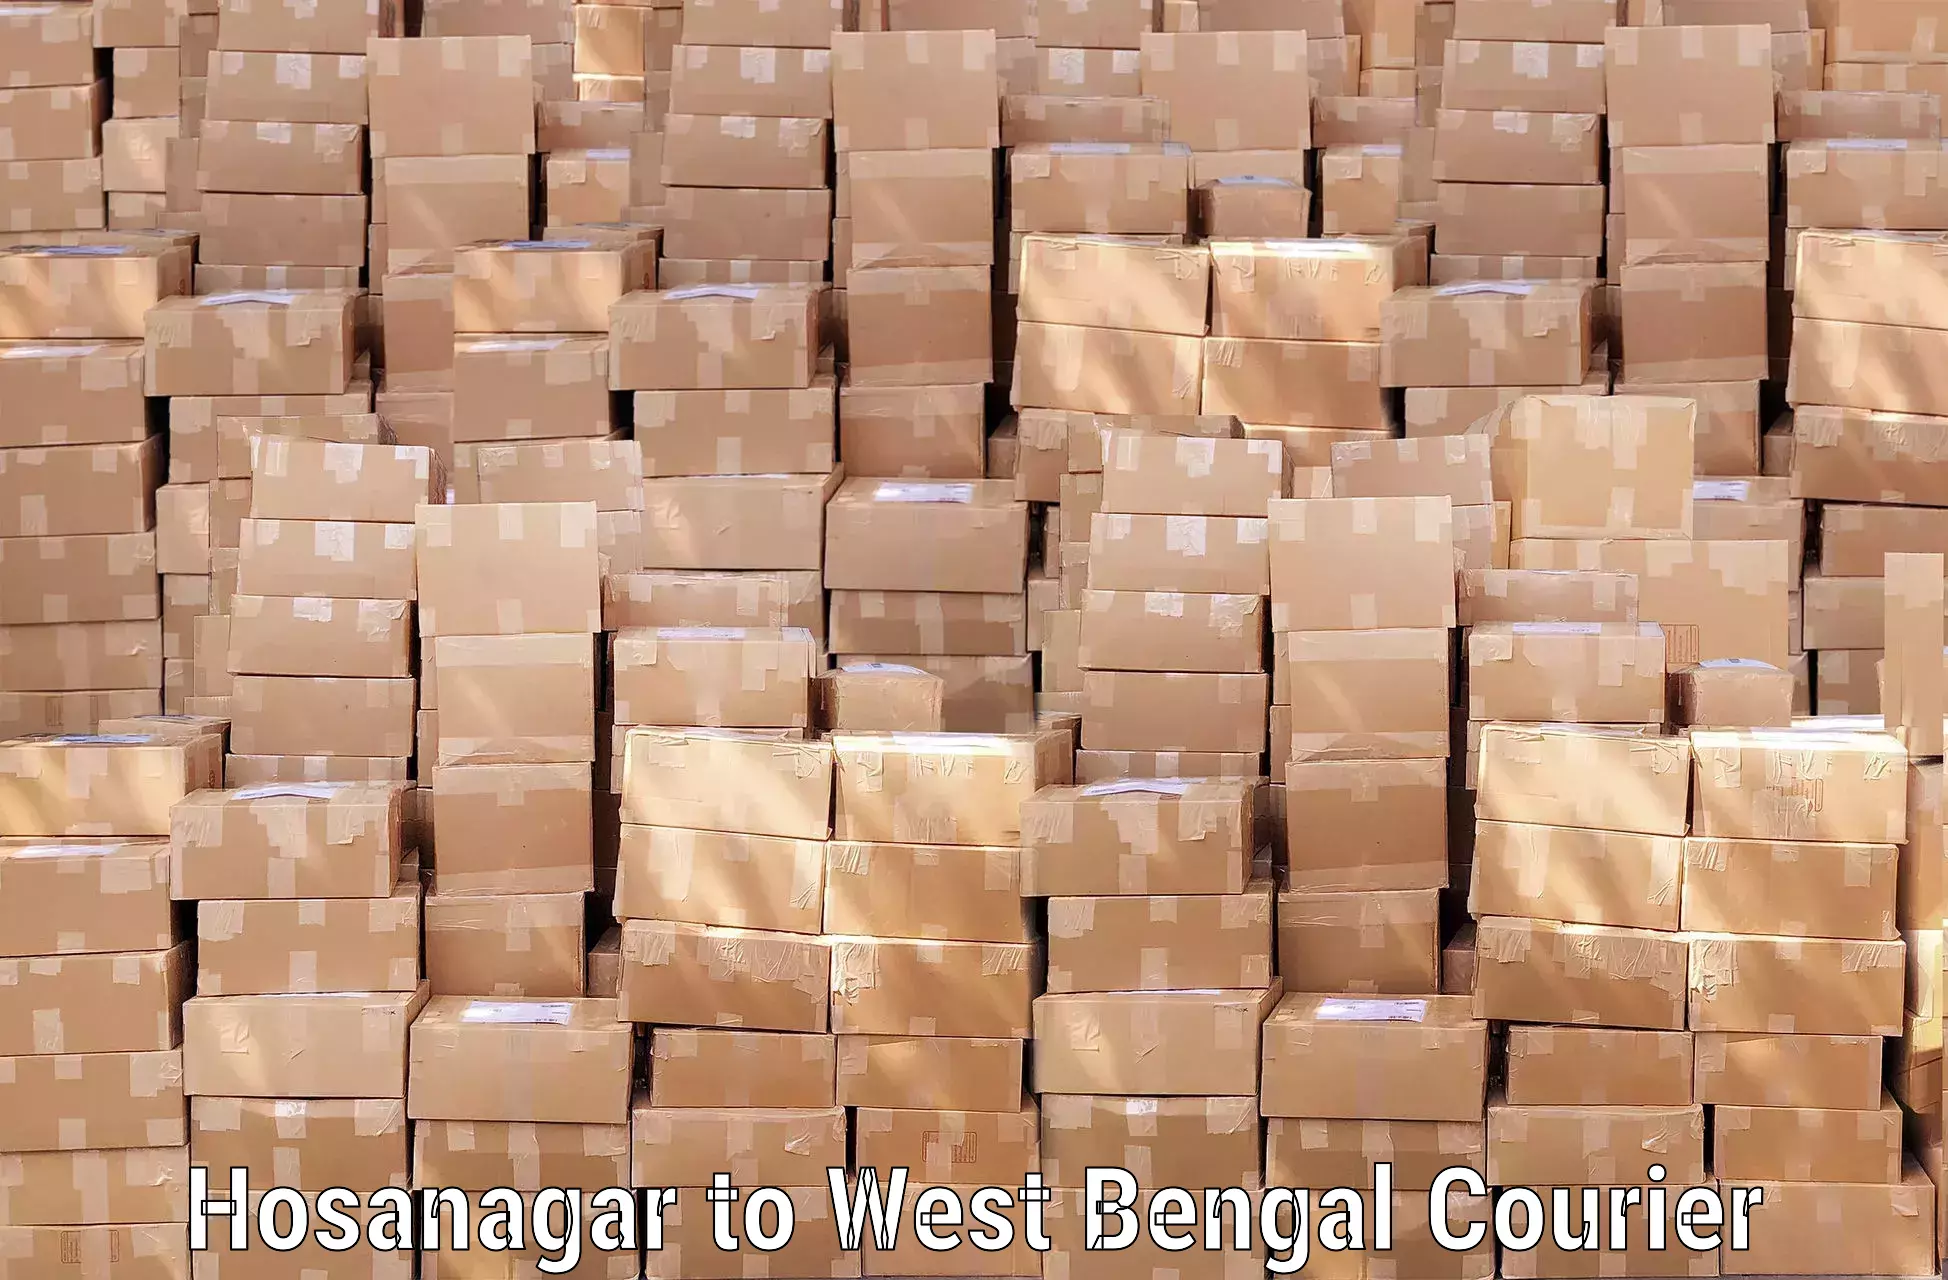 Baggage shipping experience Hosanagar to West Bengal